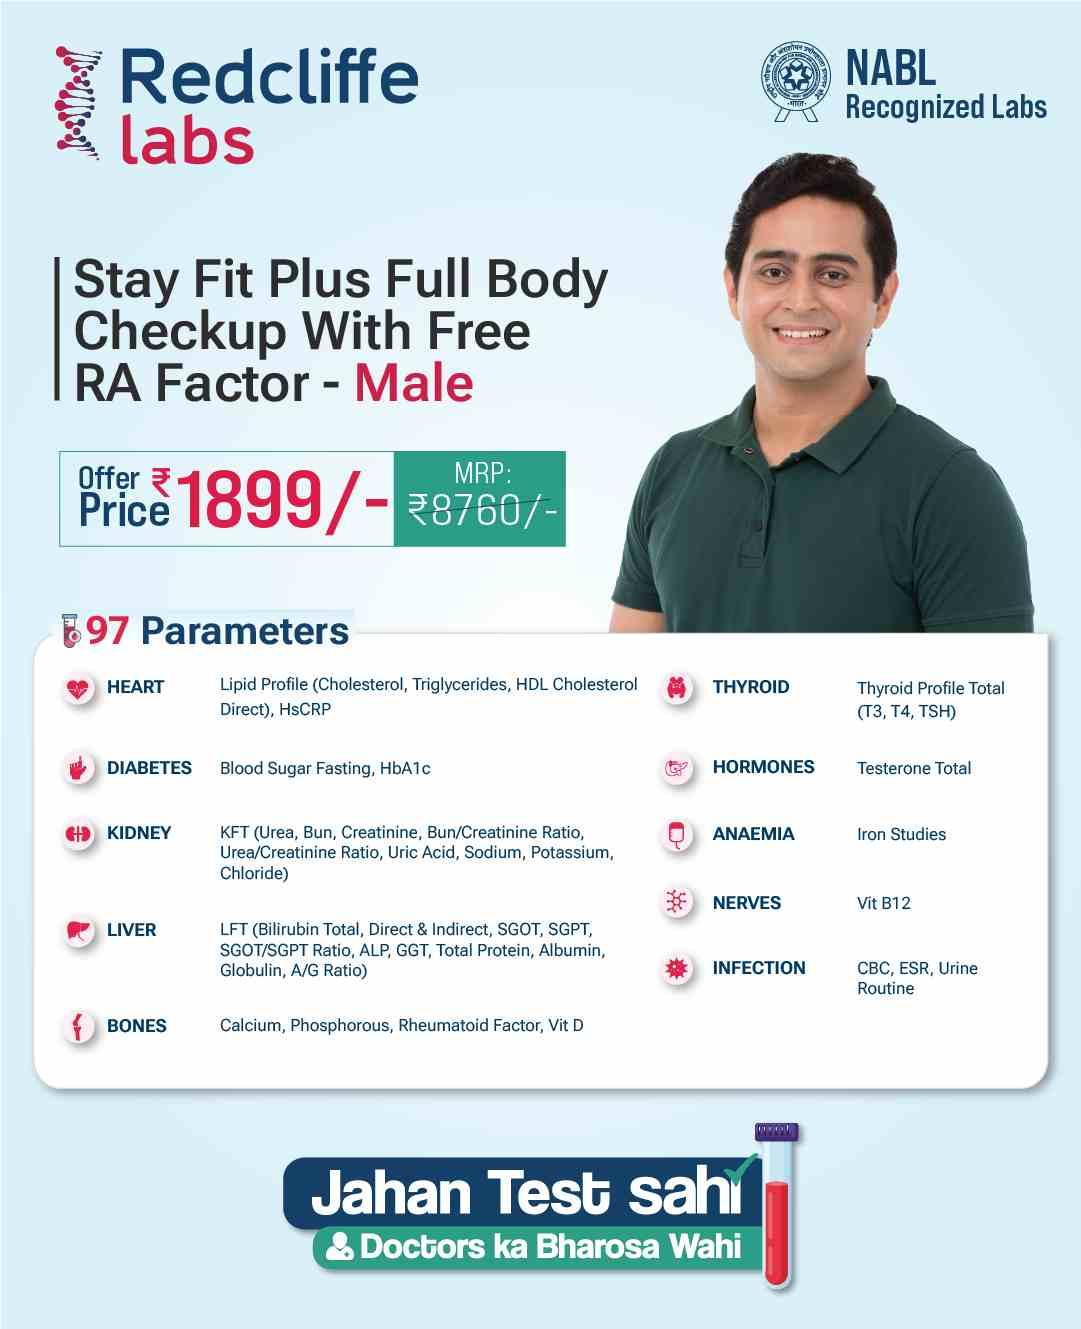 Stay Fit Plus Full Body Checkup With Free RA Factor - Male in Mumbai 